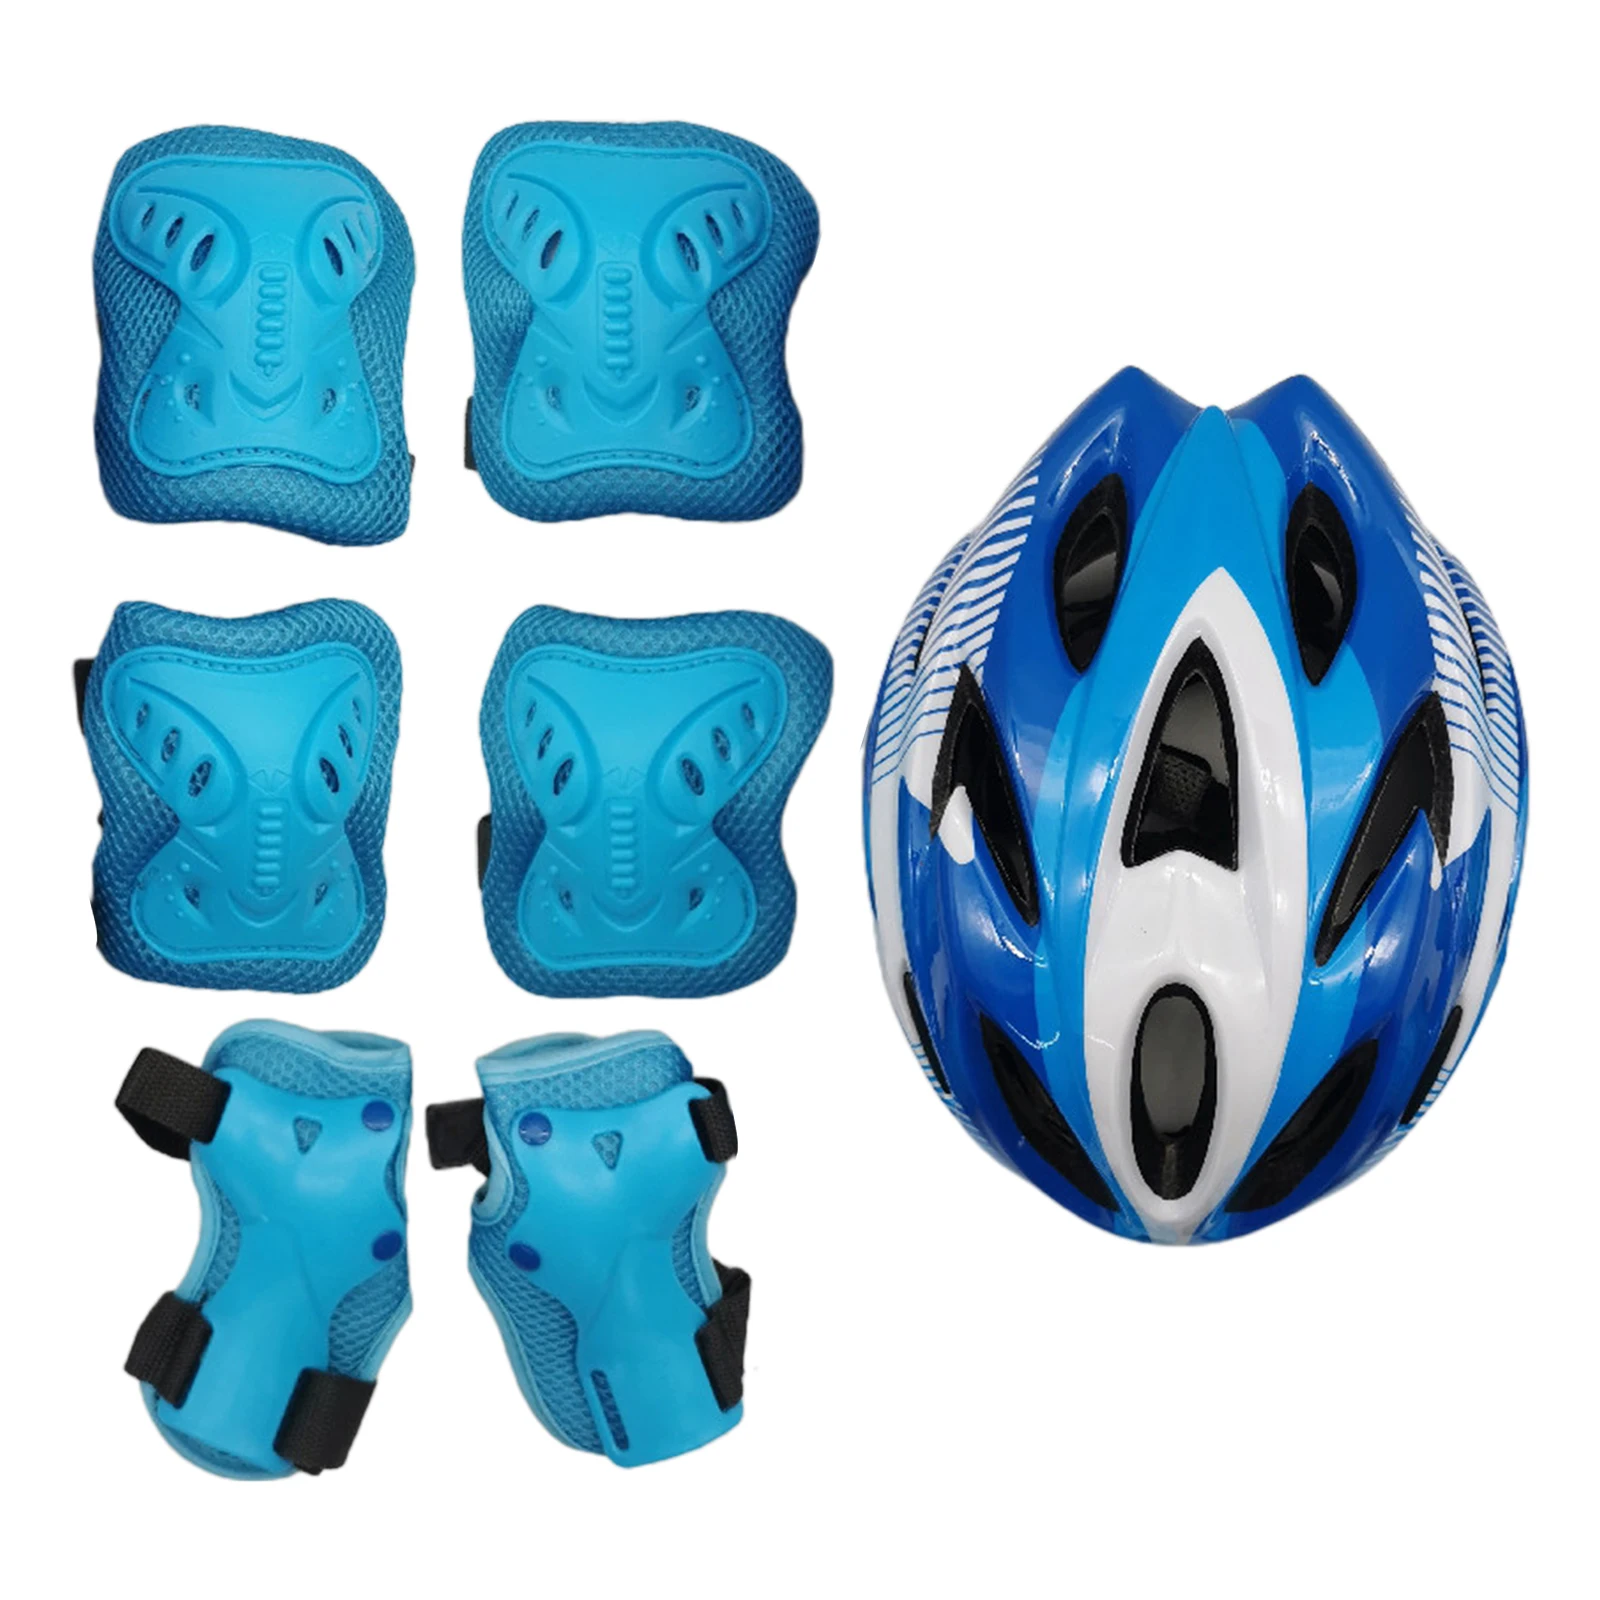 Skating Protective Gear Set Elbow Knee Pads Helmet for Kids Sports